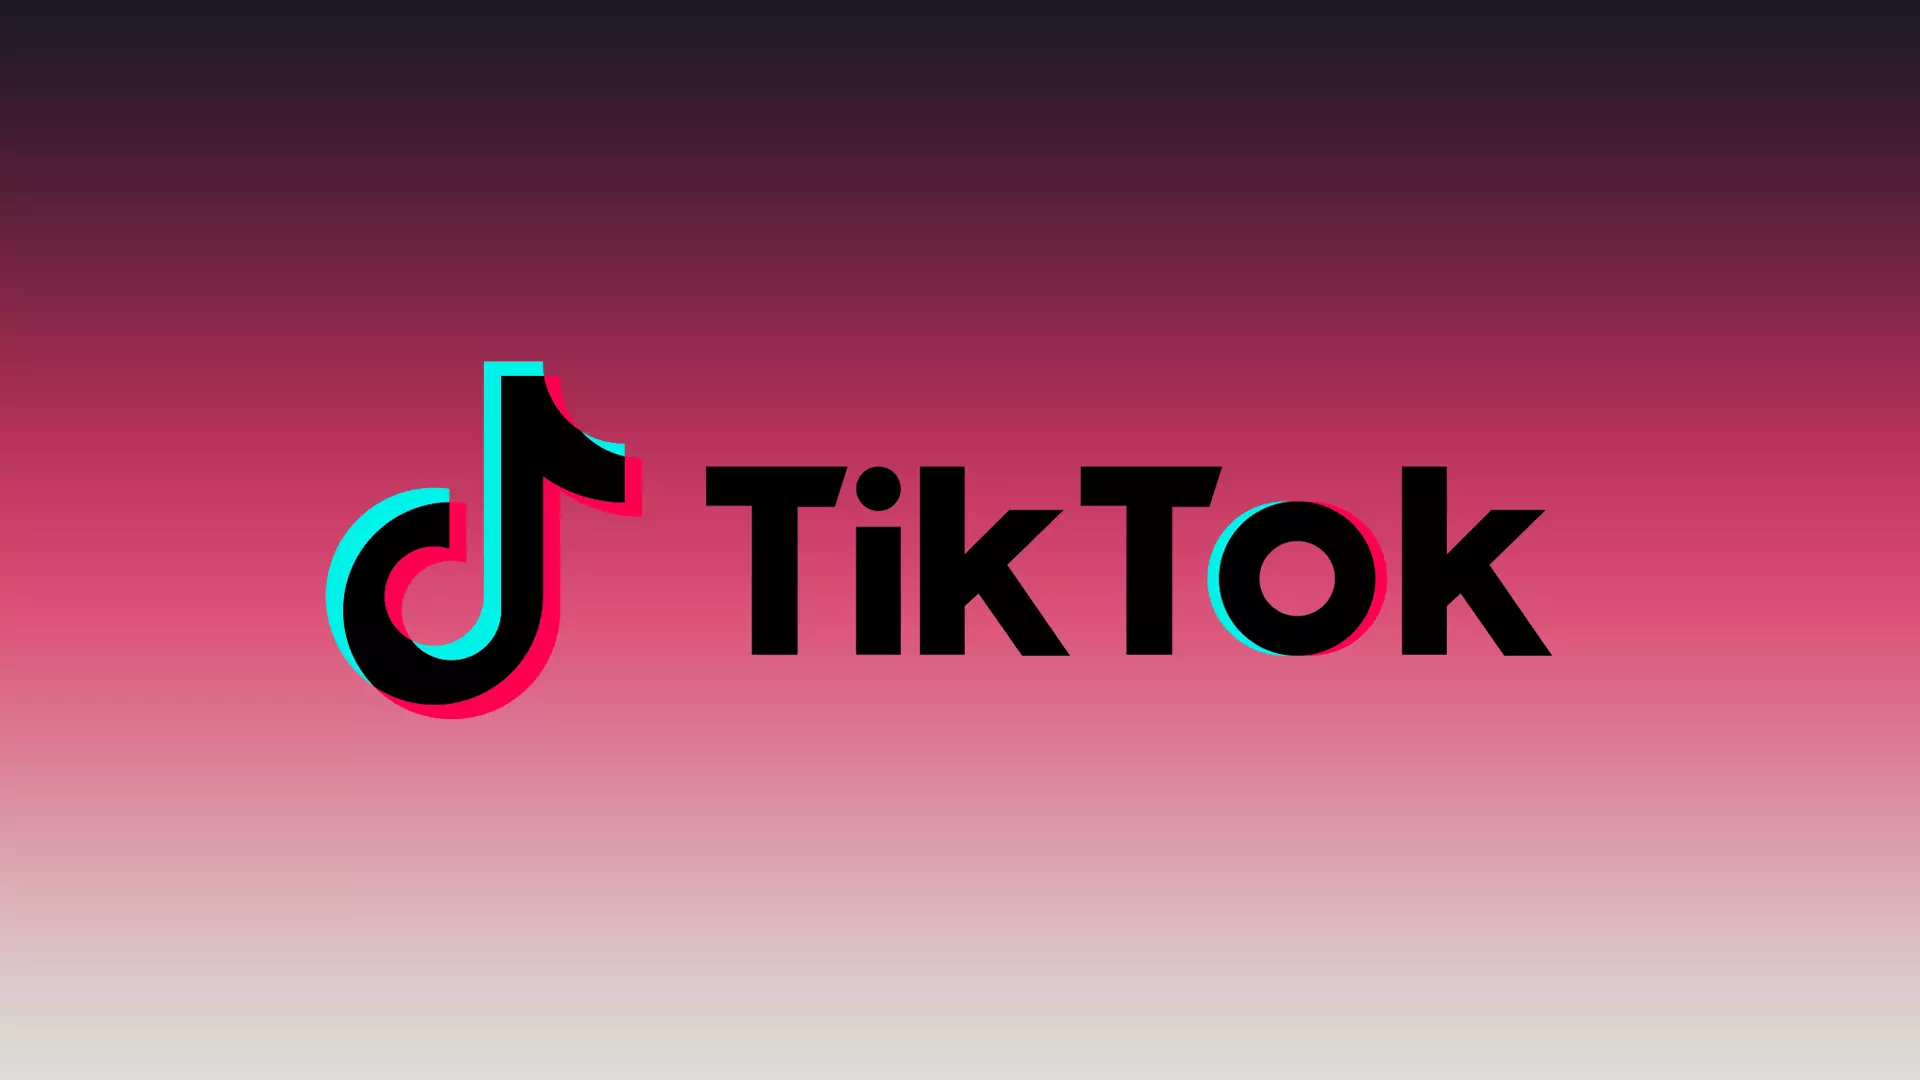 TikTok wants to roll out a live shopping feature in the U.S. this holiday season